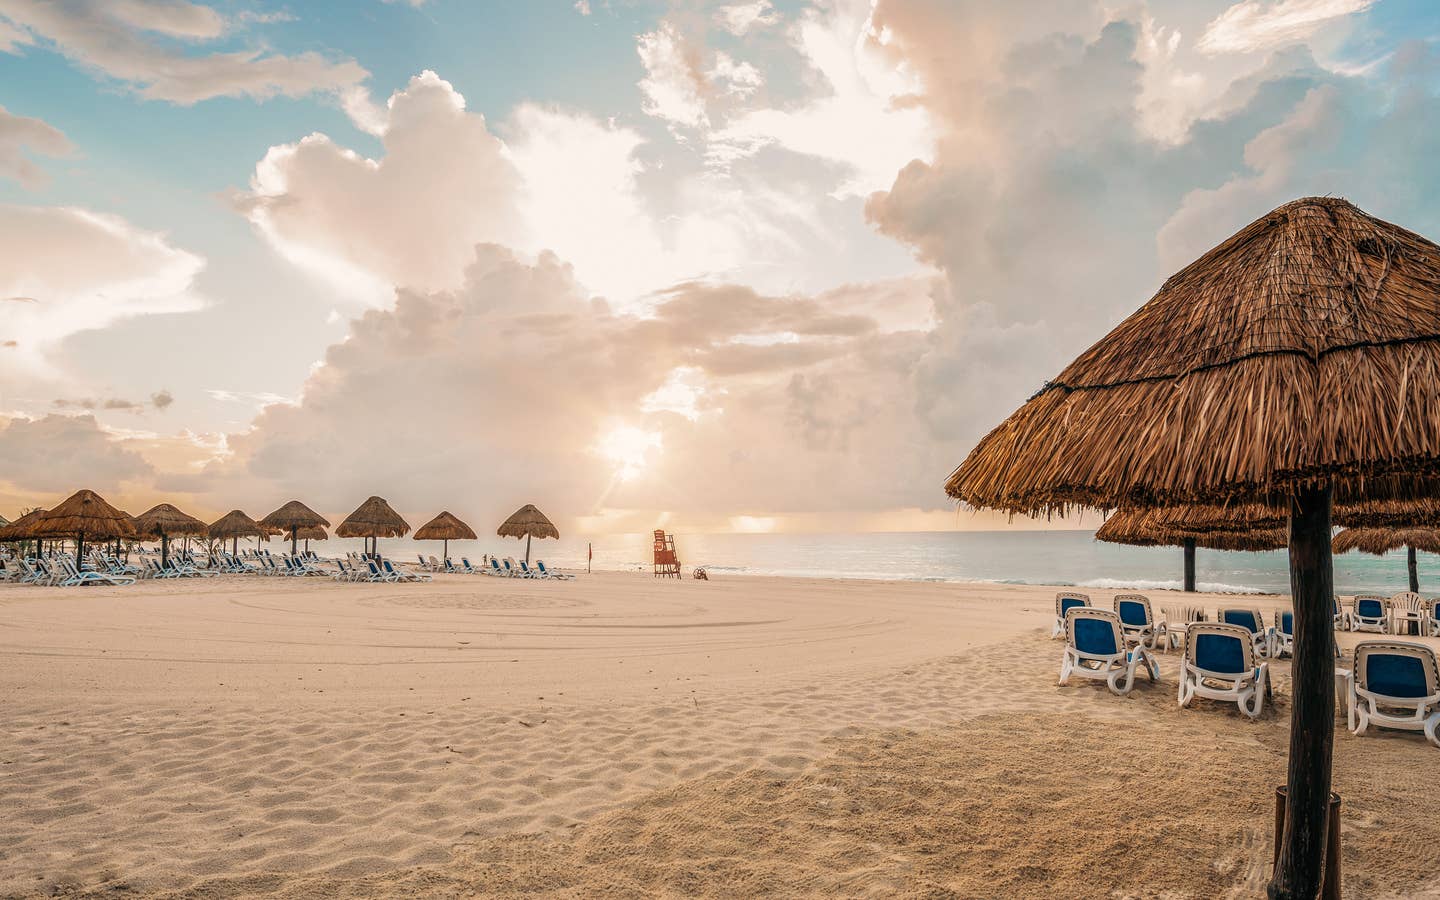 Umbrellas and sun chairs on a beach in Mexico.